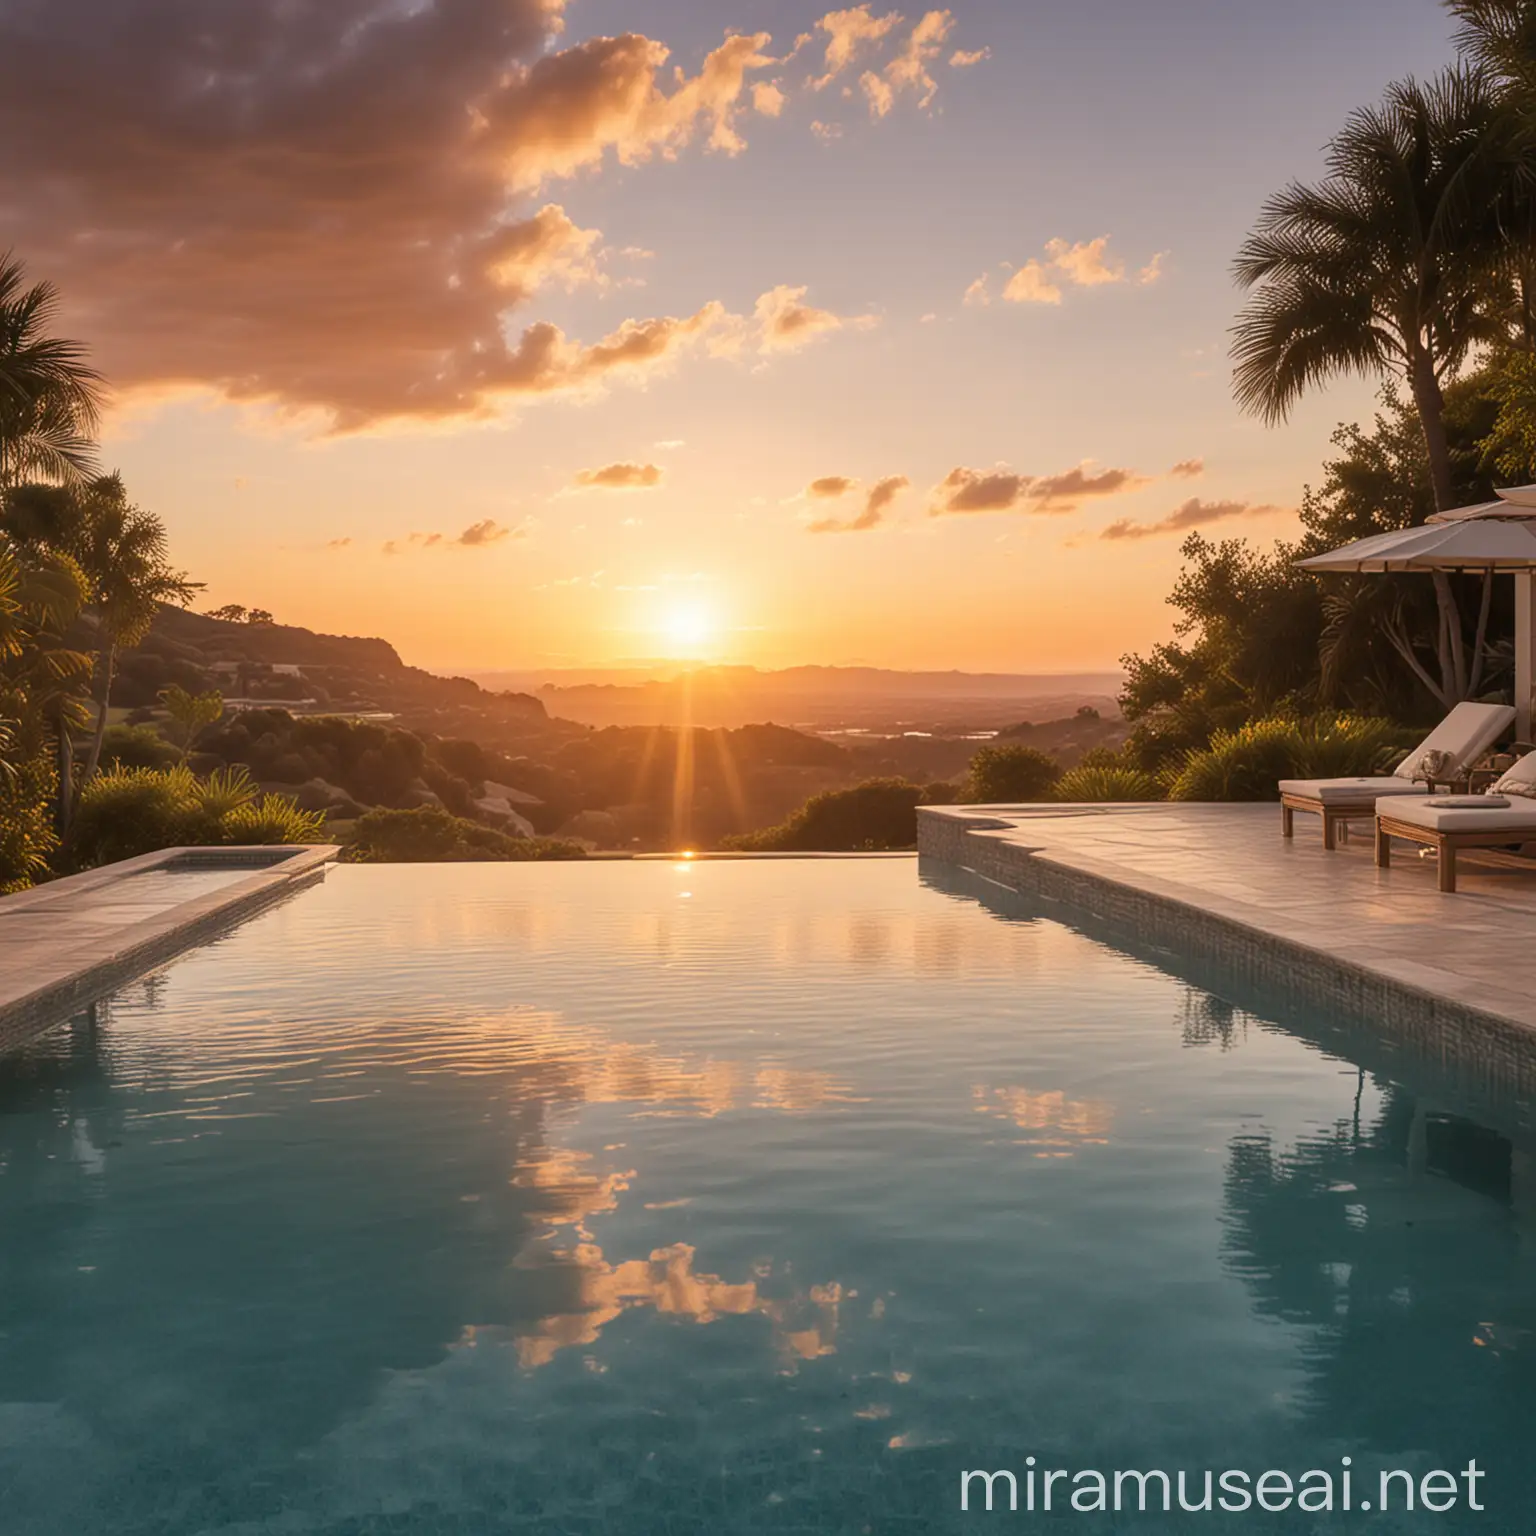 Luxurious Pool at Sunrise Tranquil Summer Setting